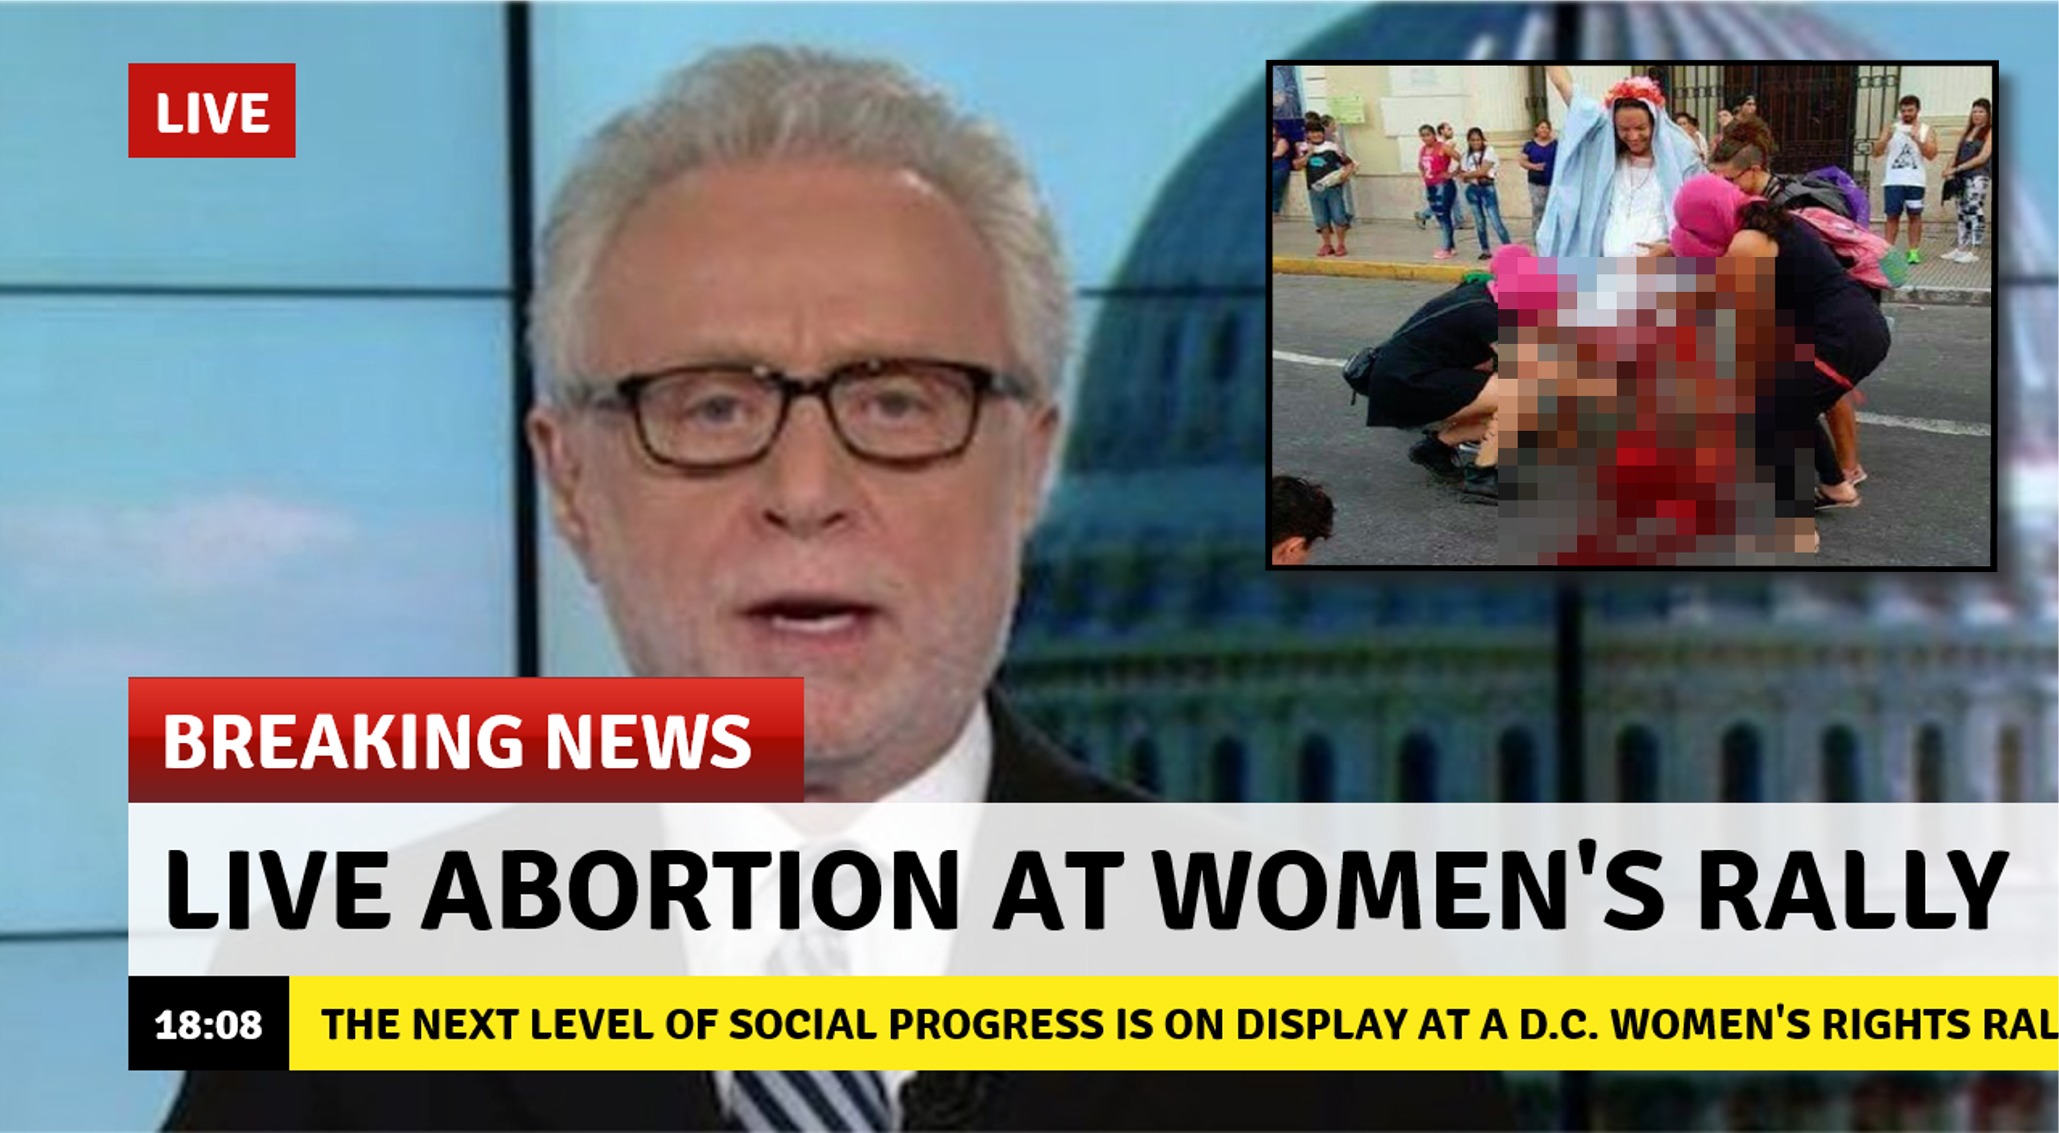 news - Live Breaking News Live Abortion At Women'S Rally The Next Level Of Social Progress Is On Display At A D.C. Women'S Rights Ral